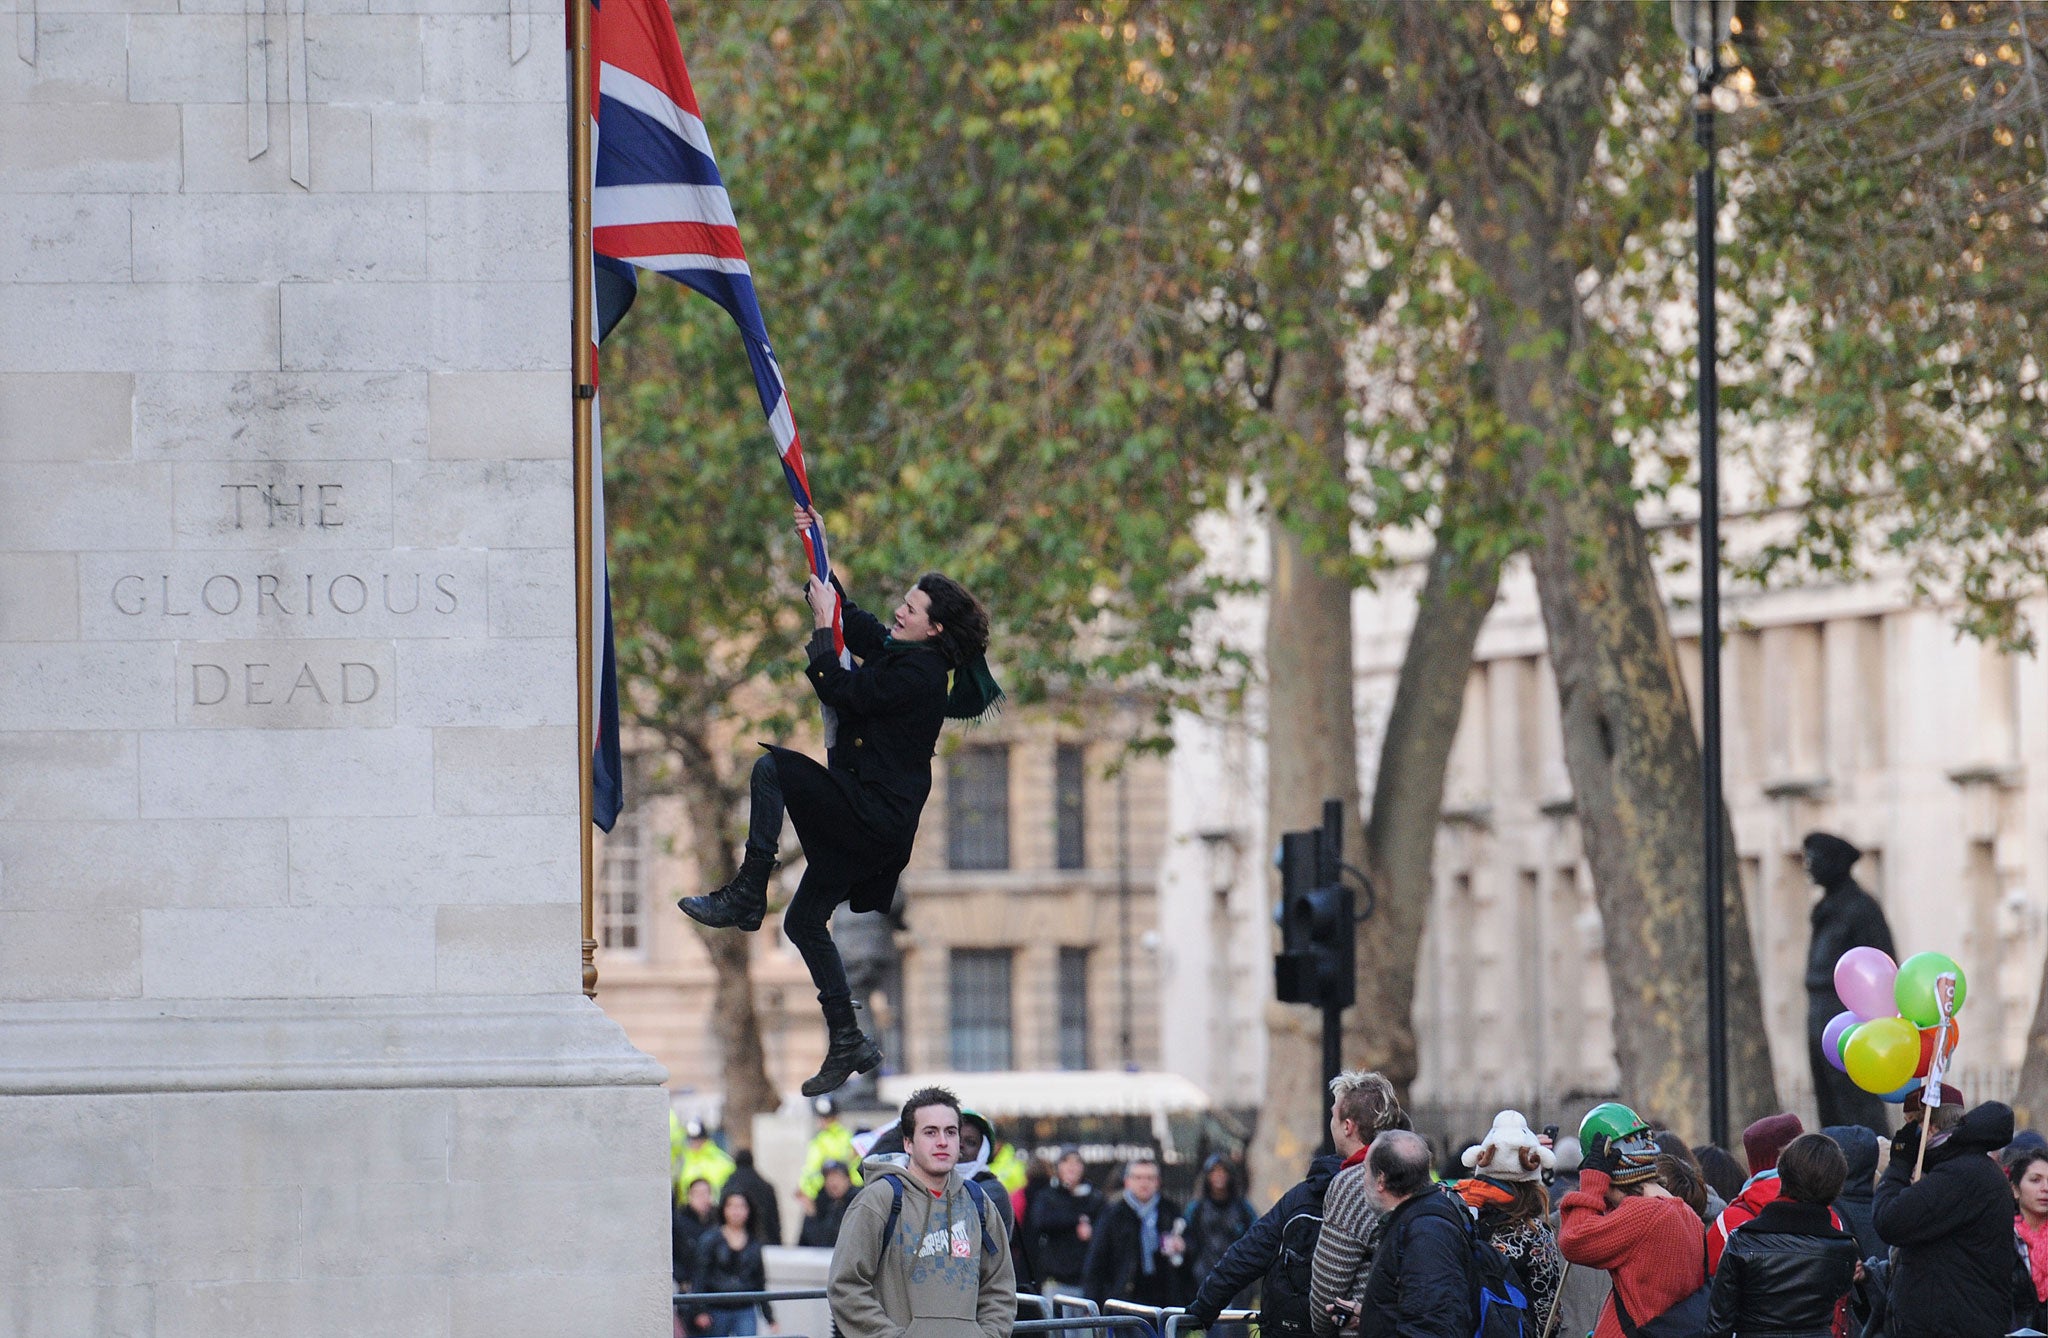 Gilmour received death threats after images appeared of him swinging from a flag on the Cenotaph during demonstrates against higher tuition fees in 2010